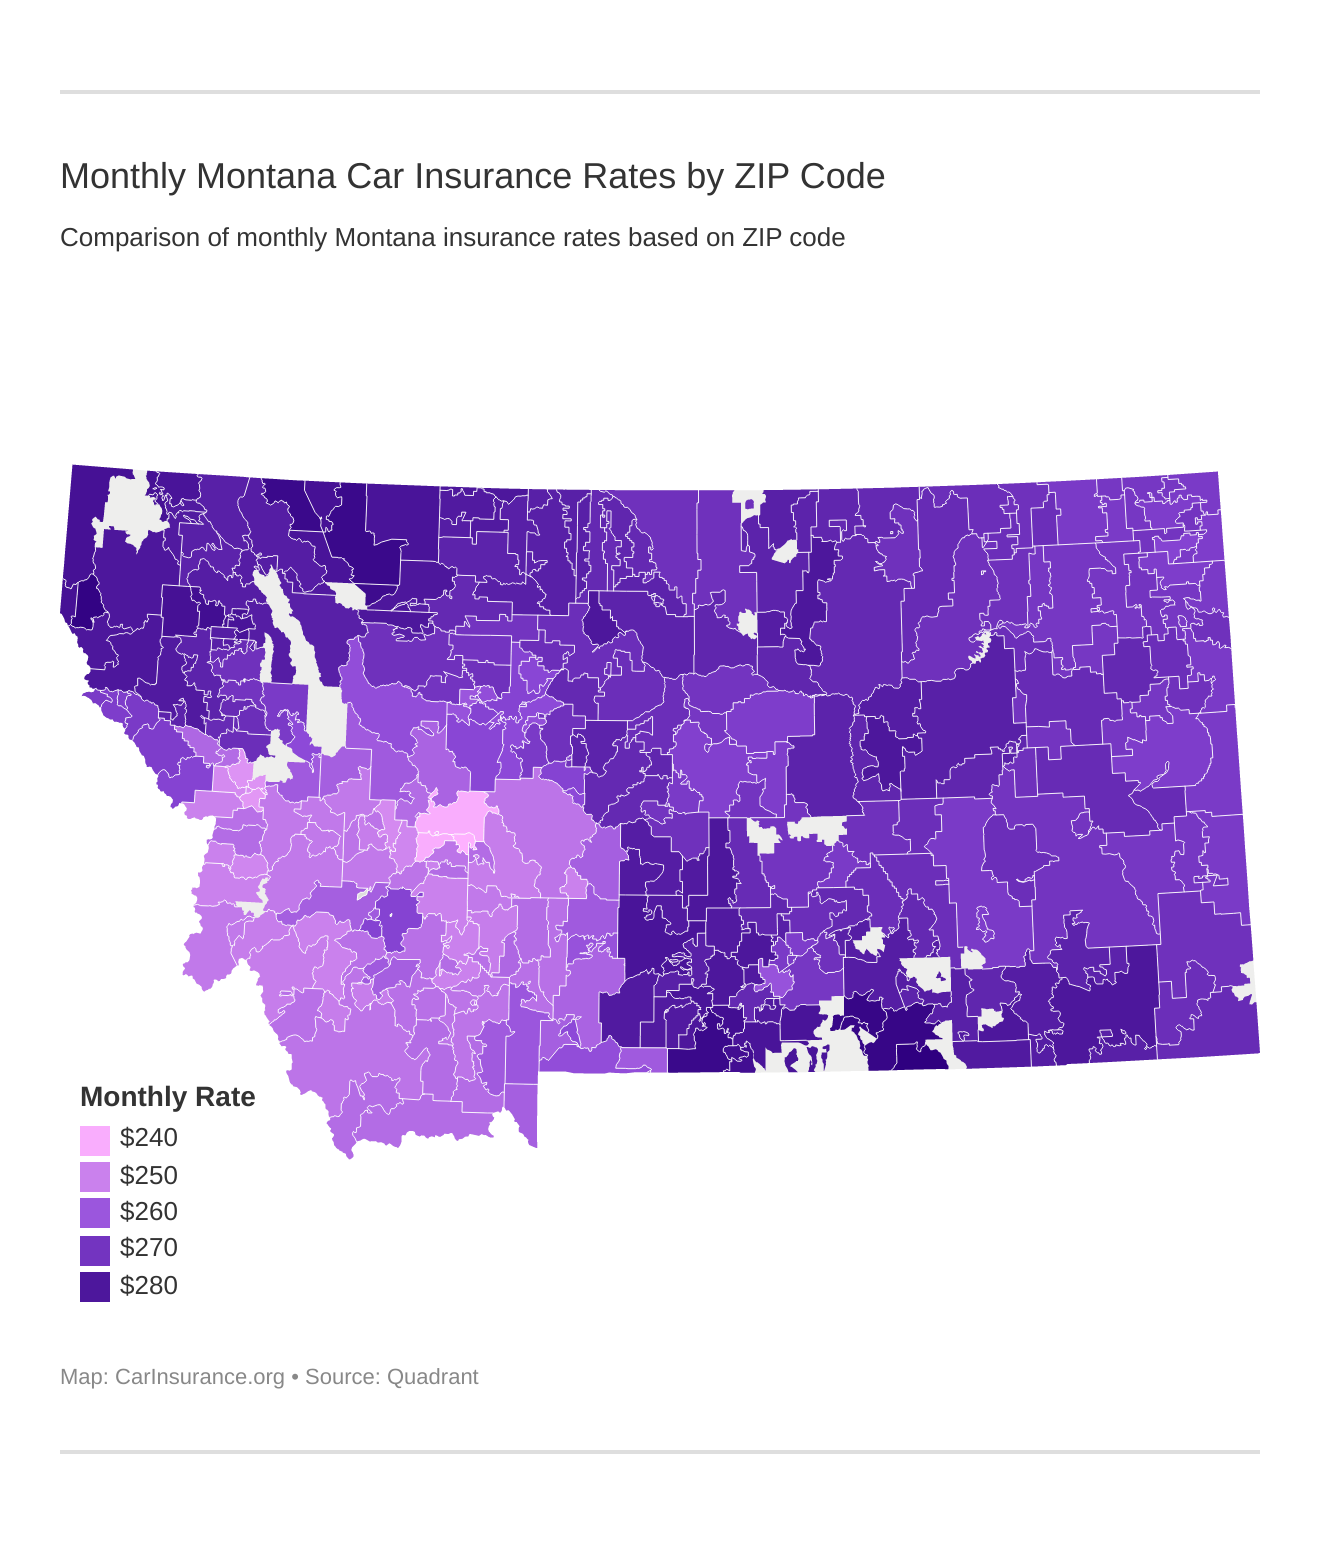 Monthly Montana Car Insurance Rates by ZIP Code